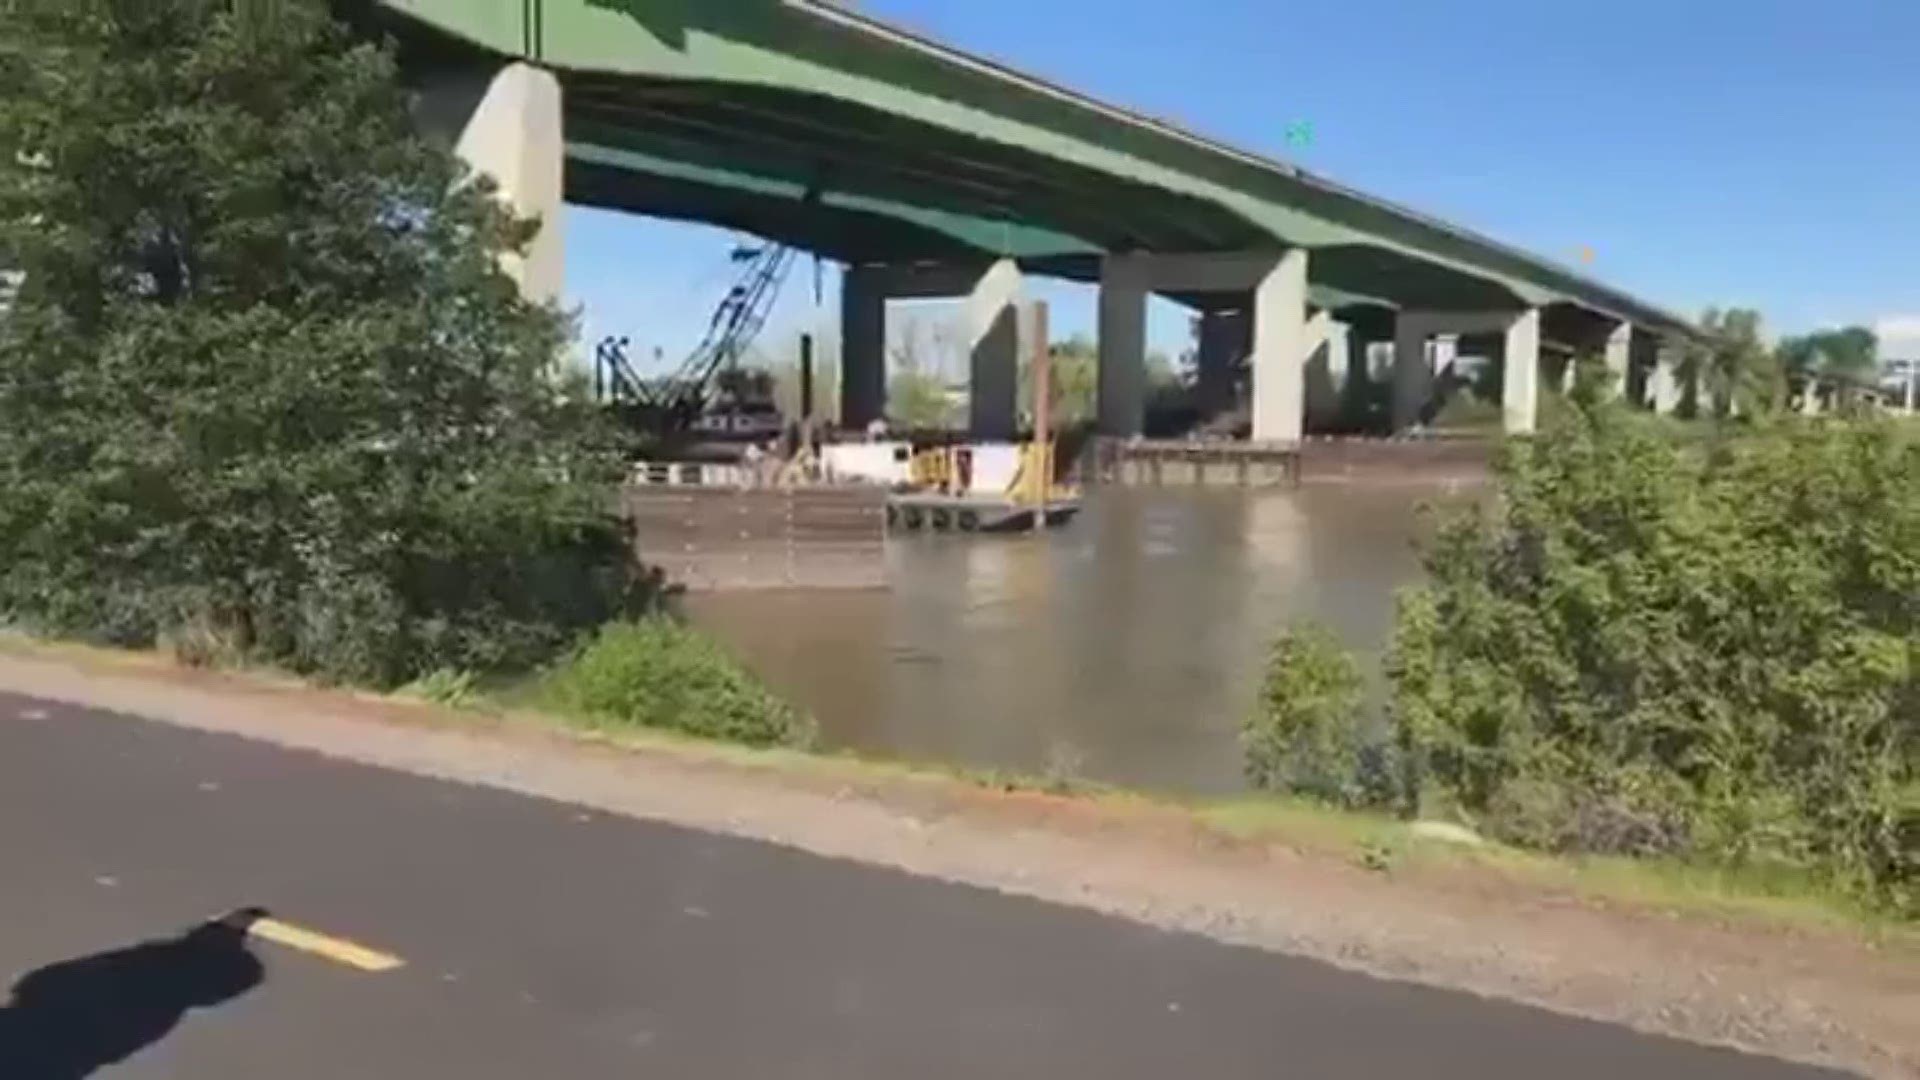 Recovery teams working under Pioneer Bridge were unable to bring the tow truck, which fell into the water on March 26, up to the surface on Friday. They say they will resume their efforts on Saturday morning.